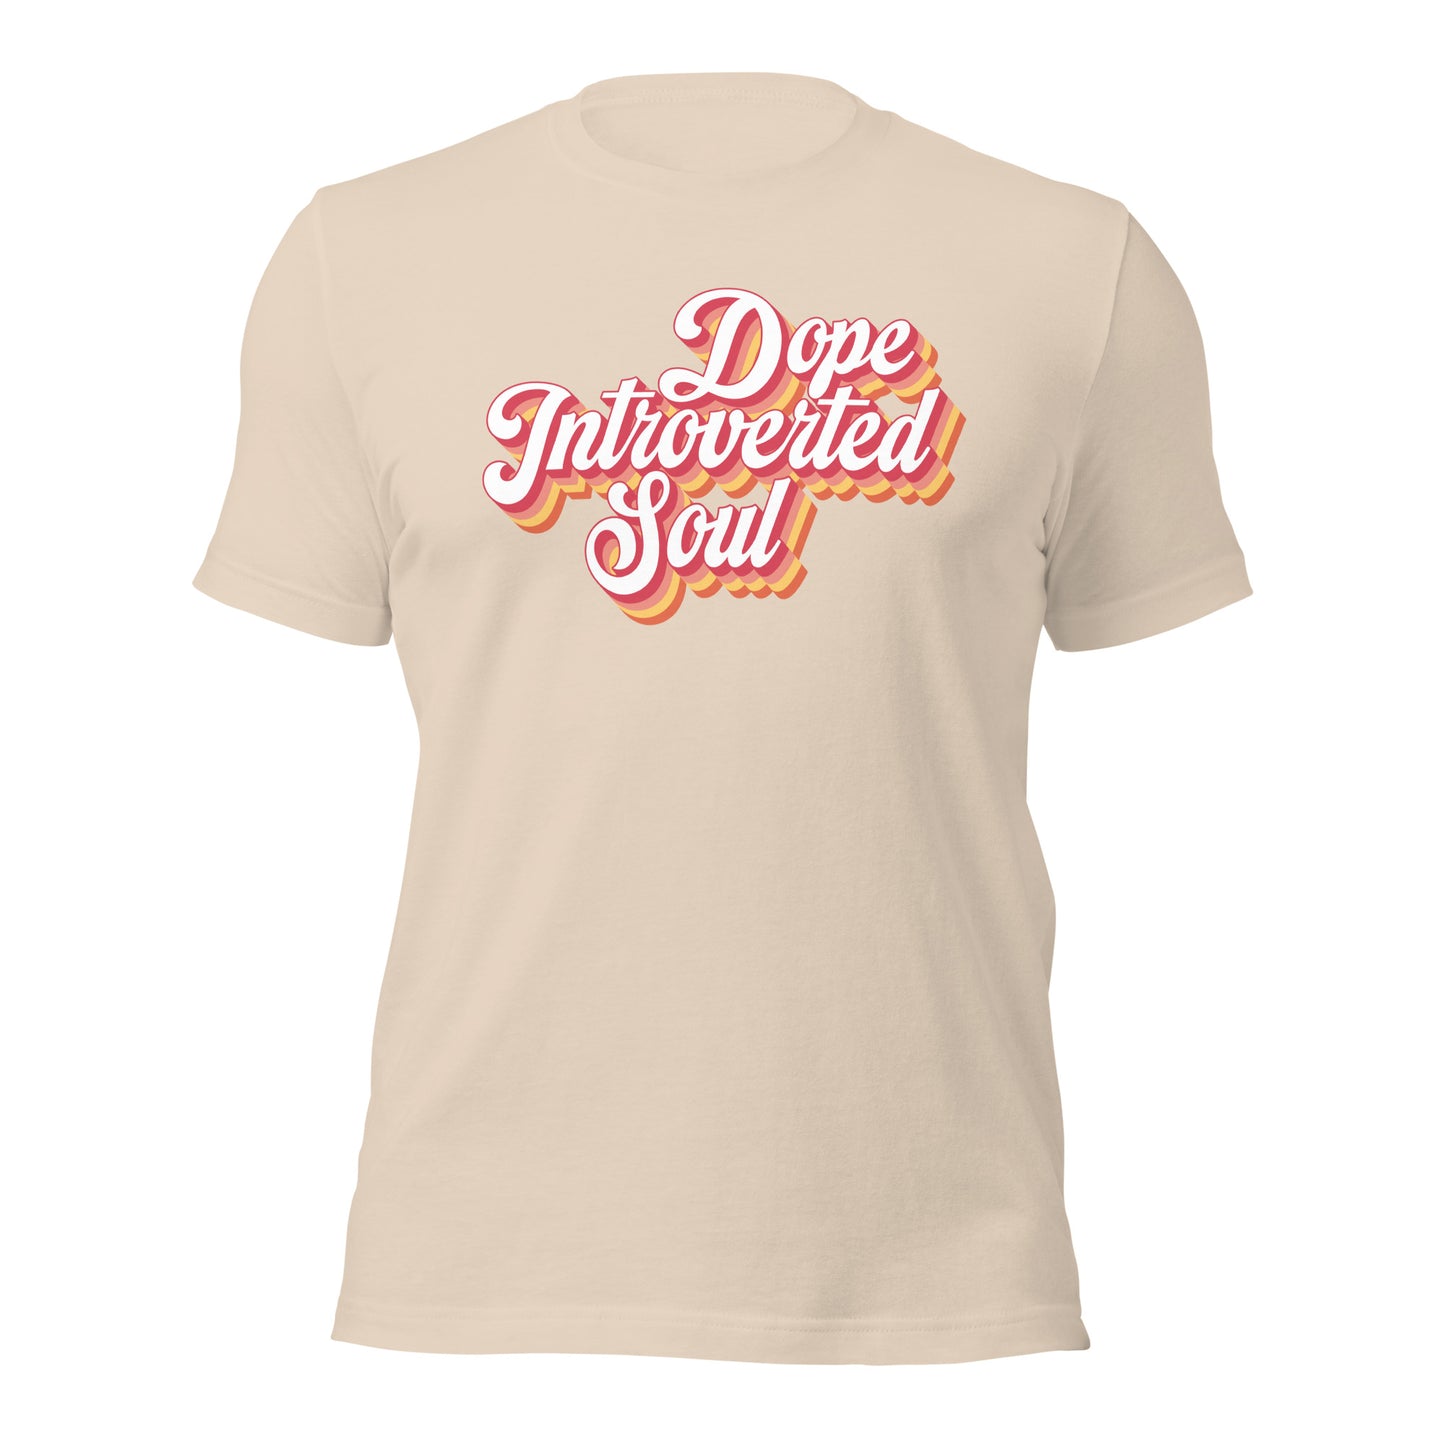 Dope Introverted Soul T-shirt